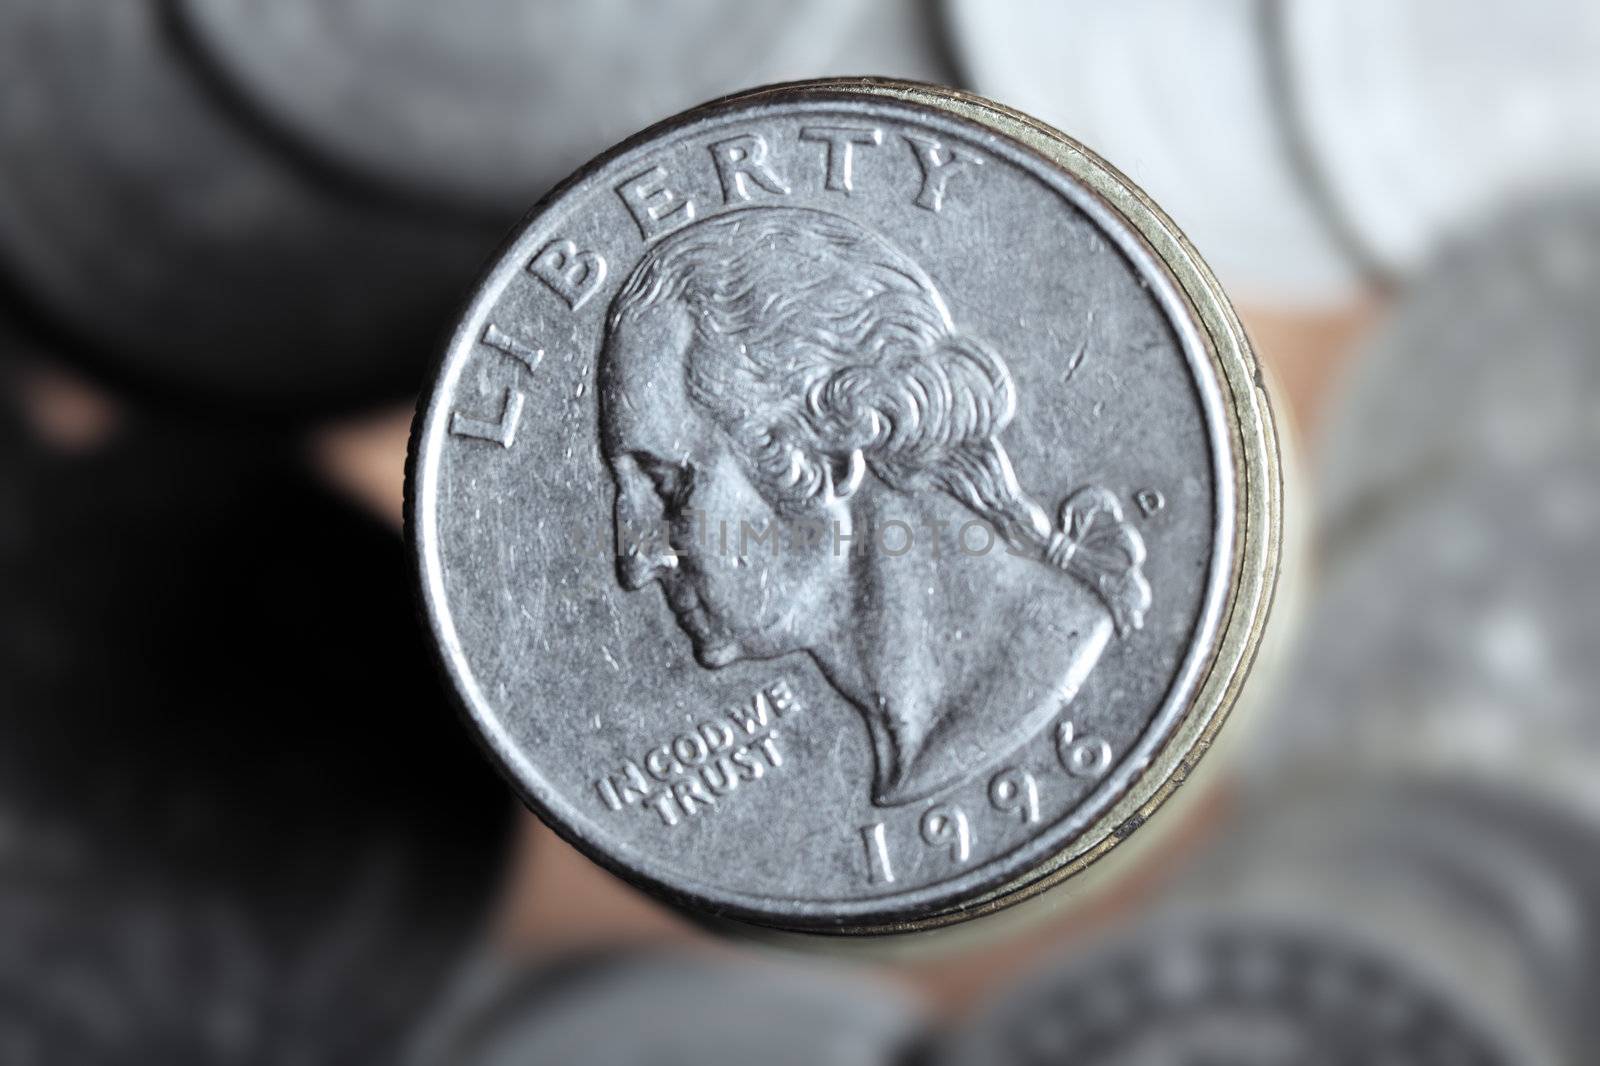 Close-up photo of the US coin with George Washington